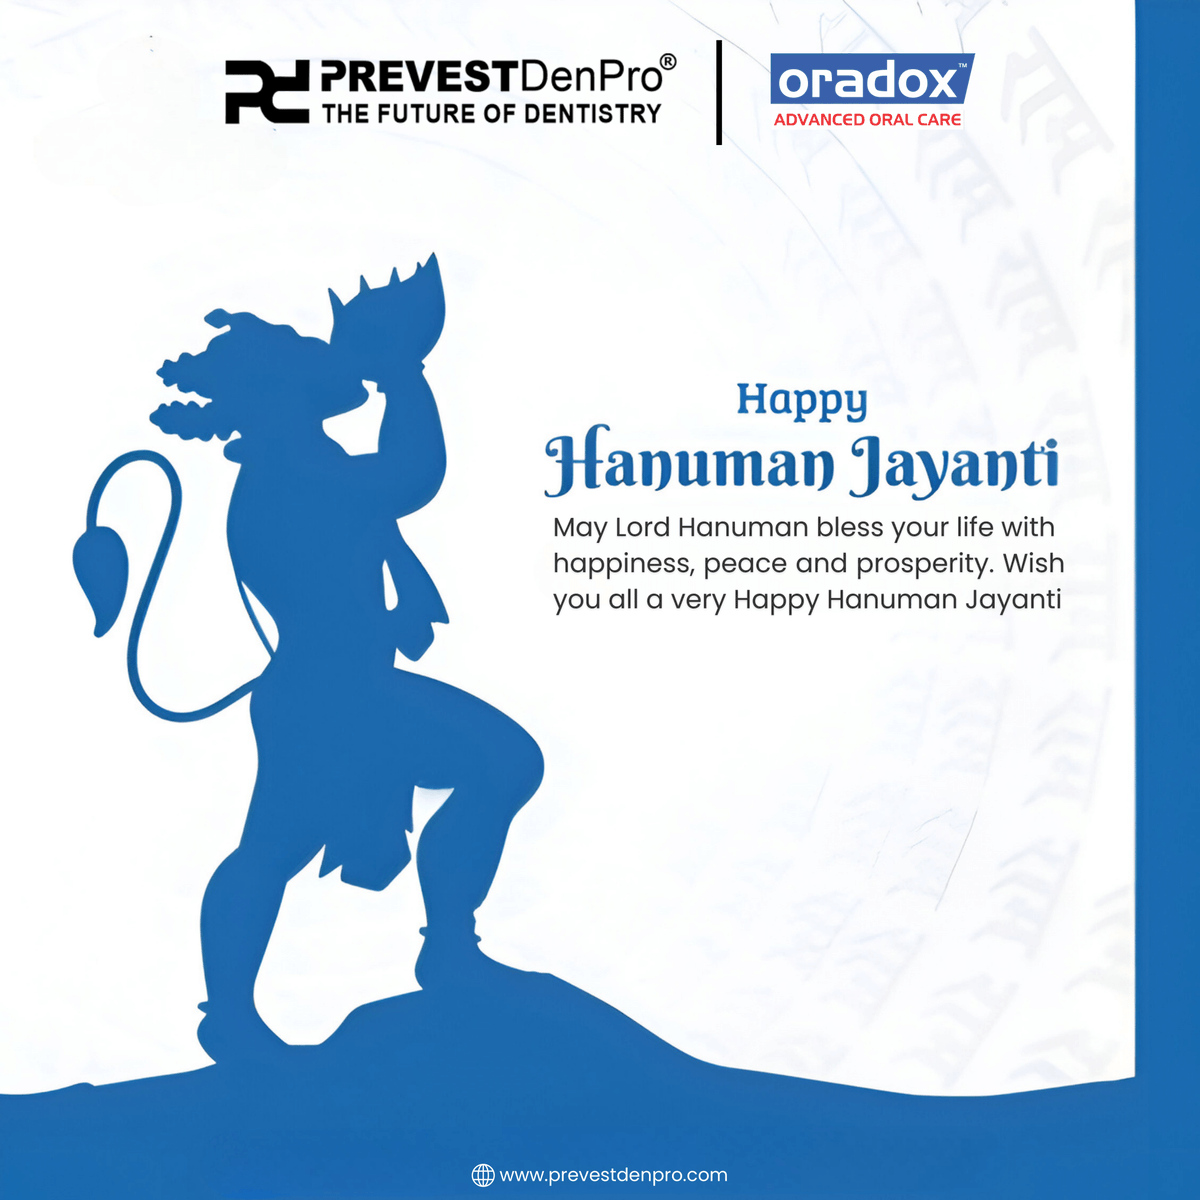 Let us celebrate the birth of Lord Hanuman, who embodies courage, devotion, and the ability to overcome any challenge. Happy Hanuman Jayanti from all of us at Prevest DenPro Limited.

#prevestdenpro #happyhanumanjayanti #hanumanjayanti2024